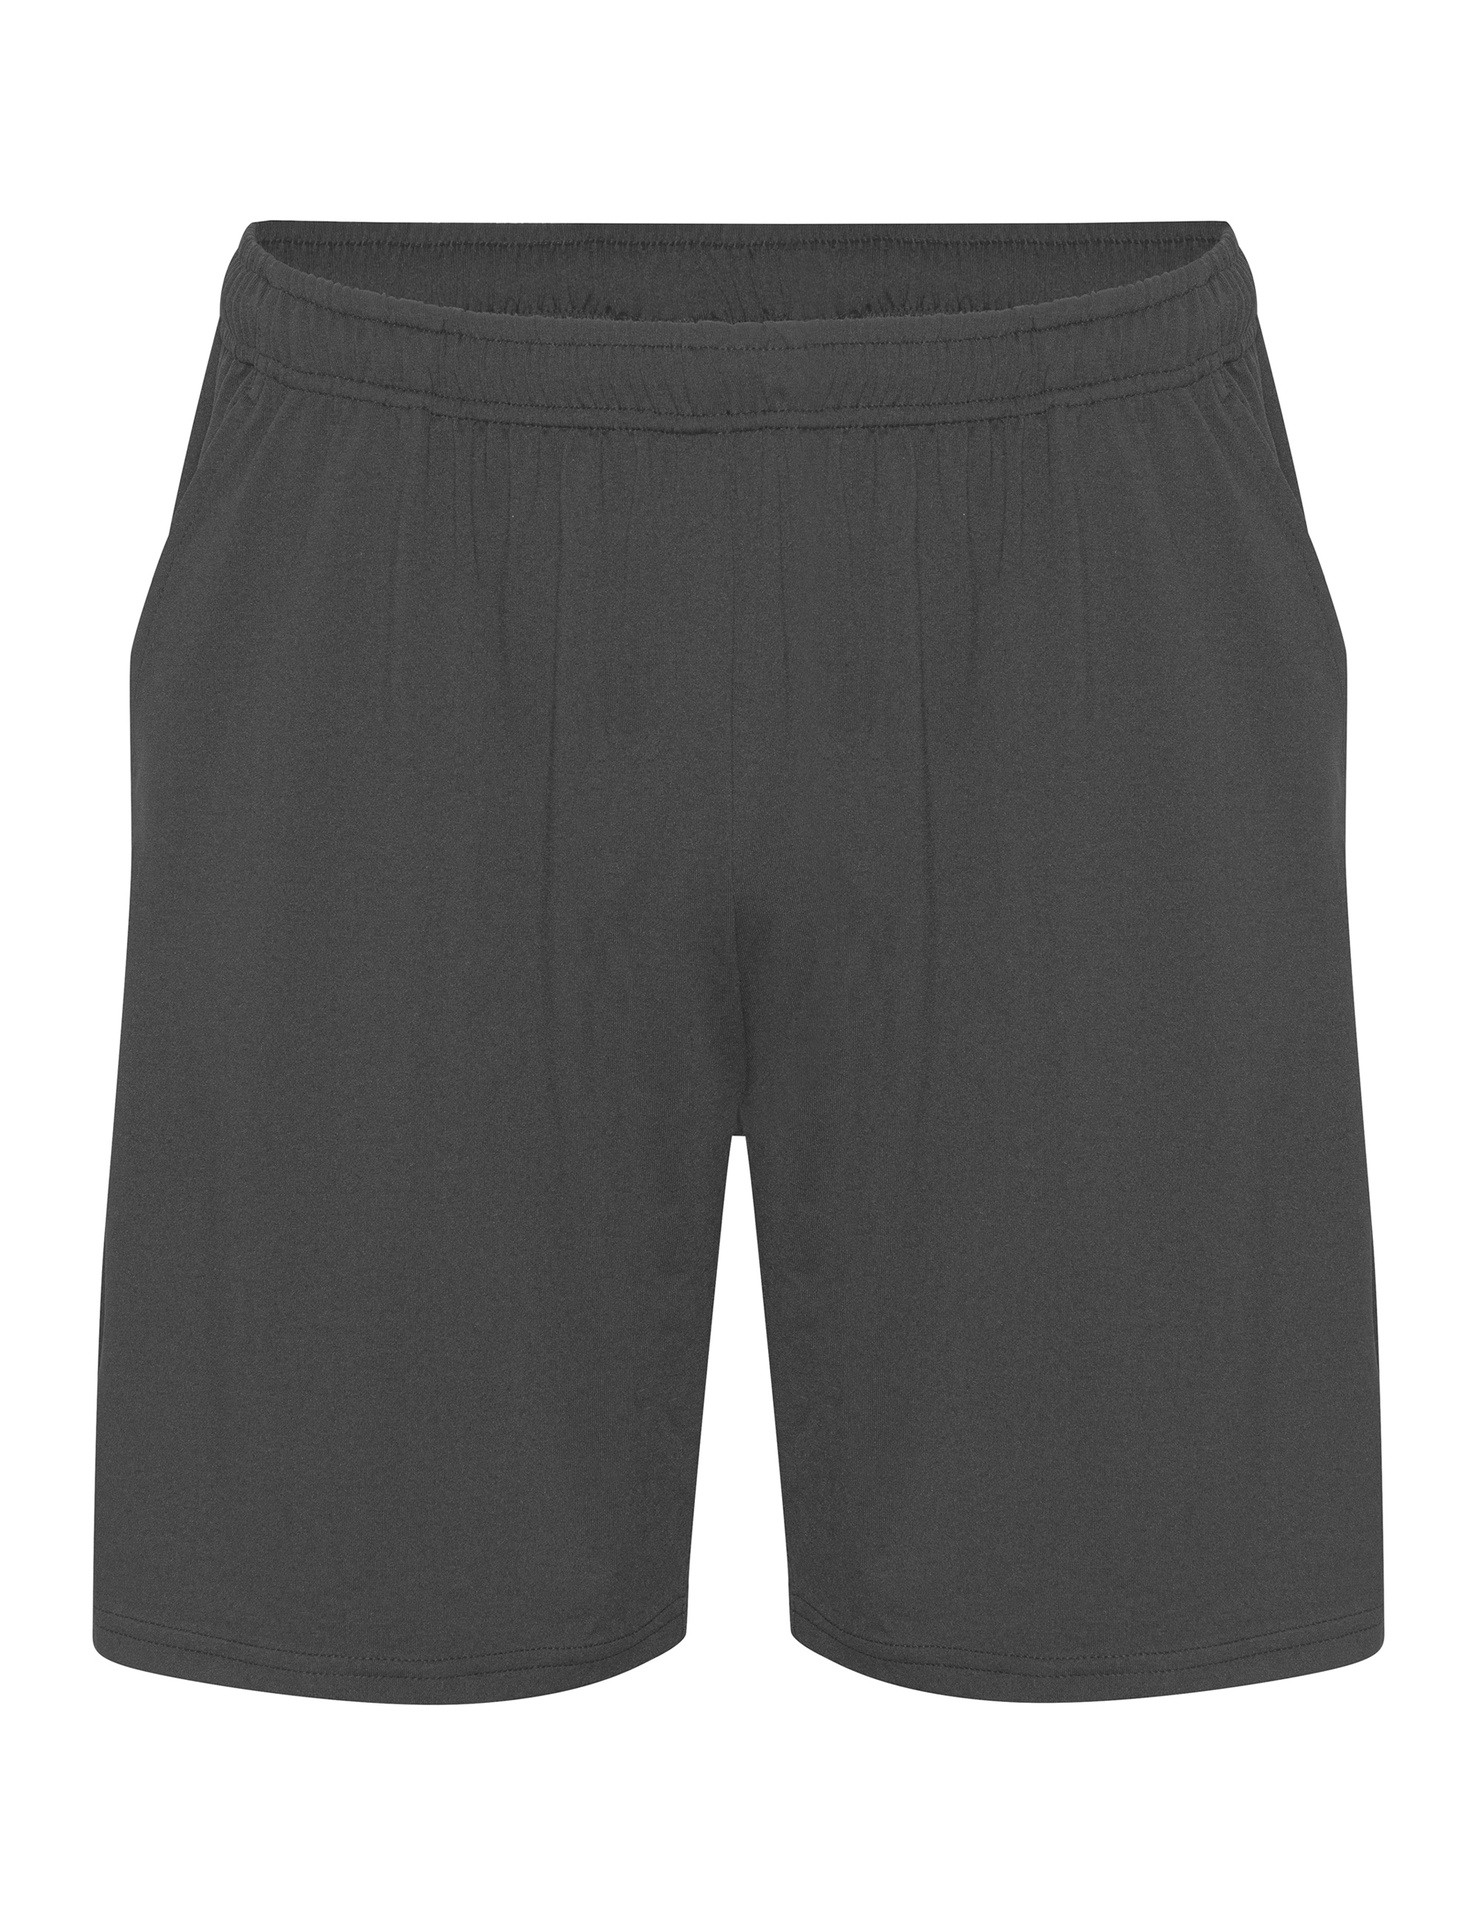 [PR/03873] Unisex Recycled Performance Shorts (Charcoal 06, L)